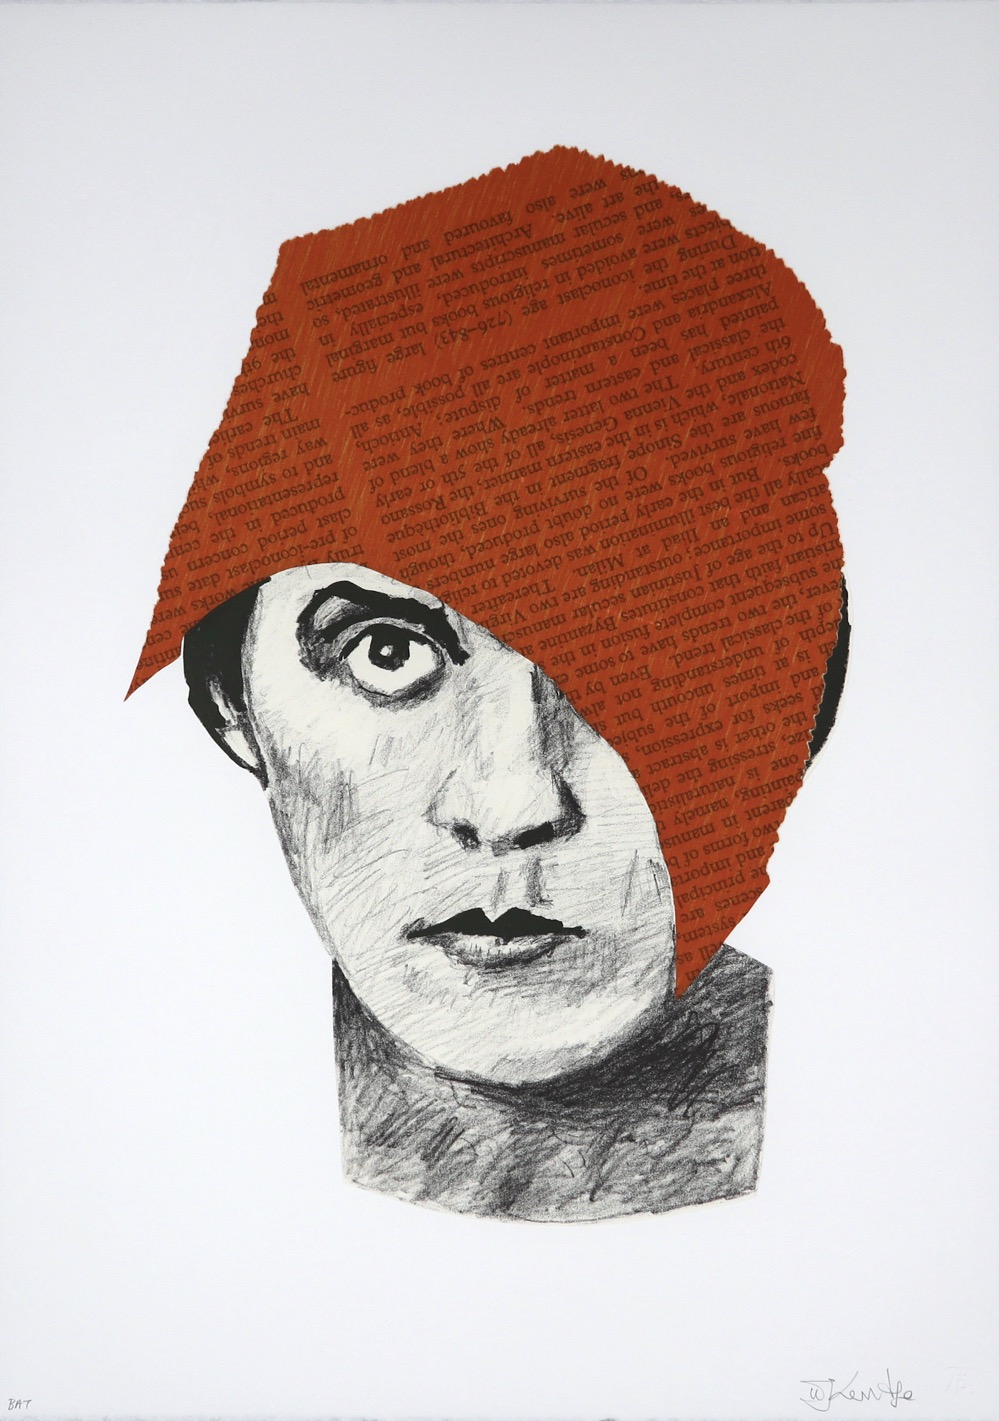 Portrait of Lily Brik facing outwards with orange collaged torn pice of paper with text on her head and covering one eye by William Kentridge